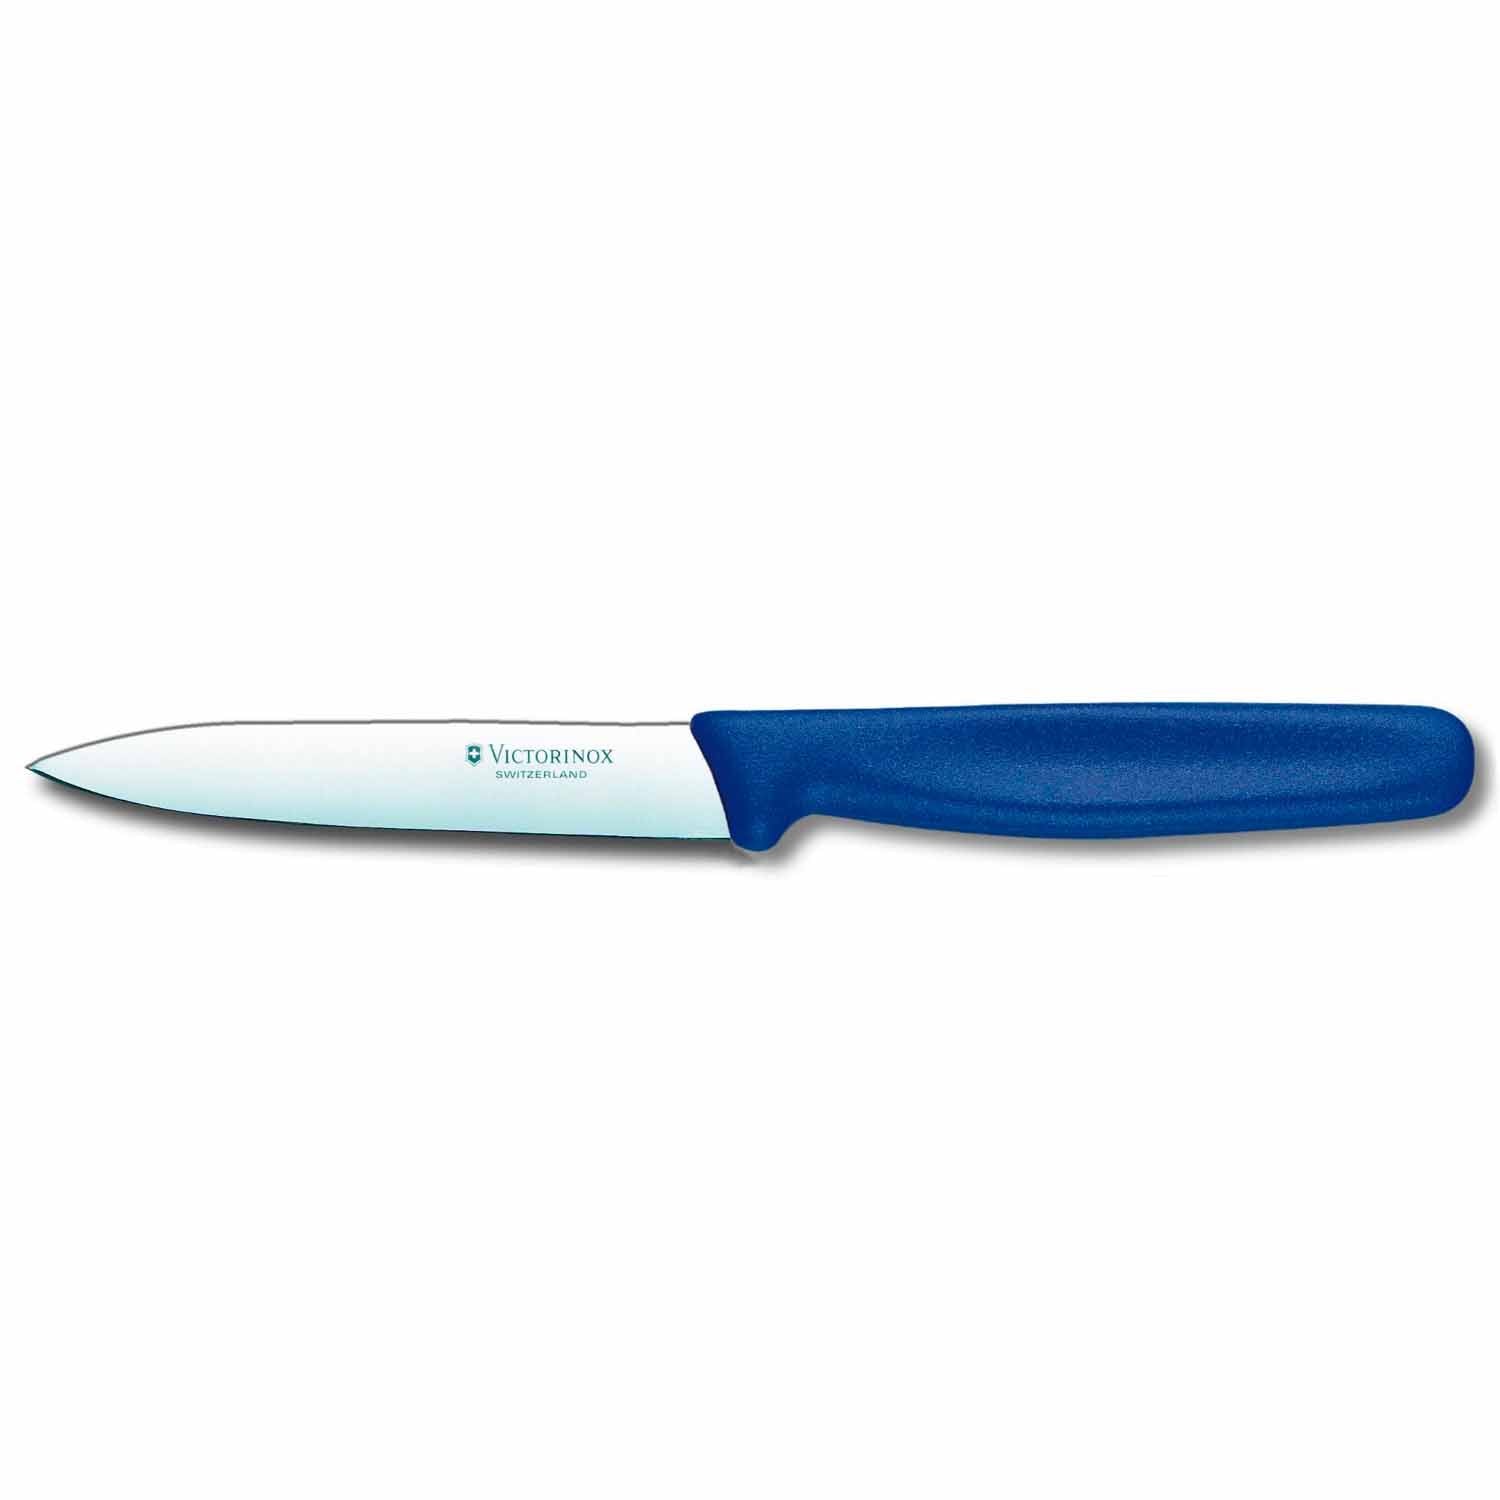 VICTORINOX PARING KNIFE, POINTED TIP - 10 CM - Mabrook Hotel Supplies